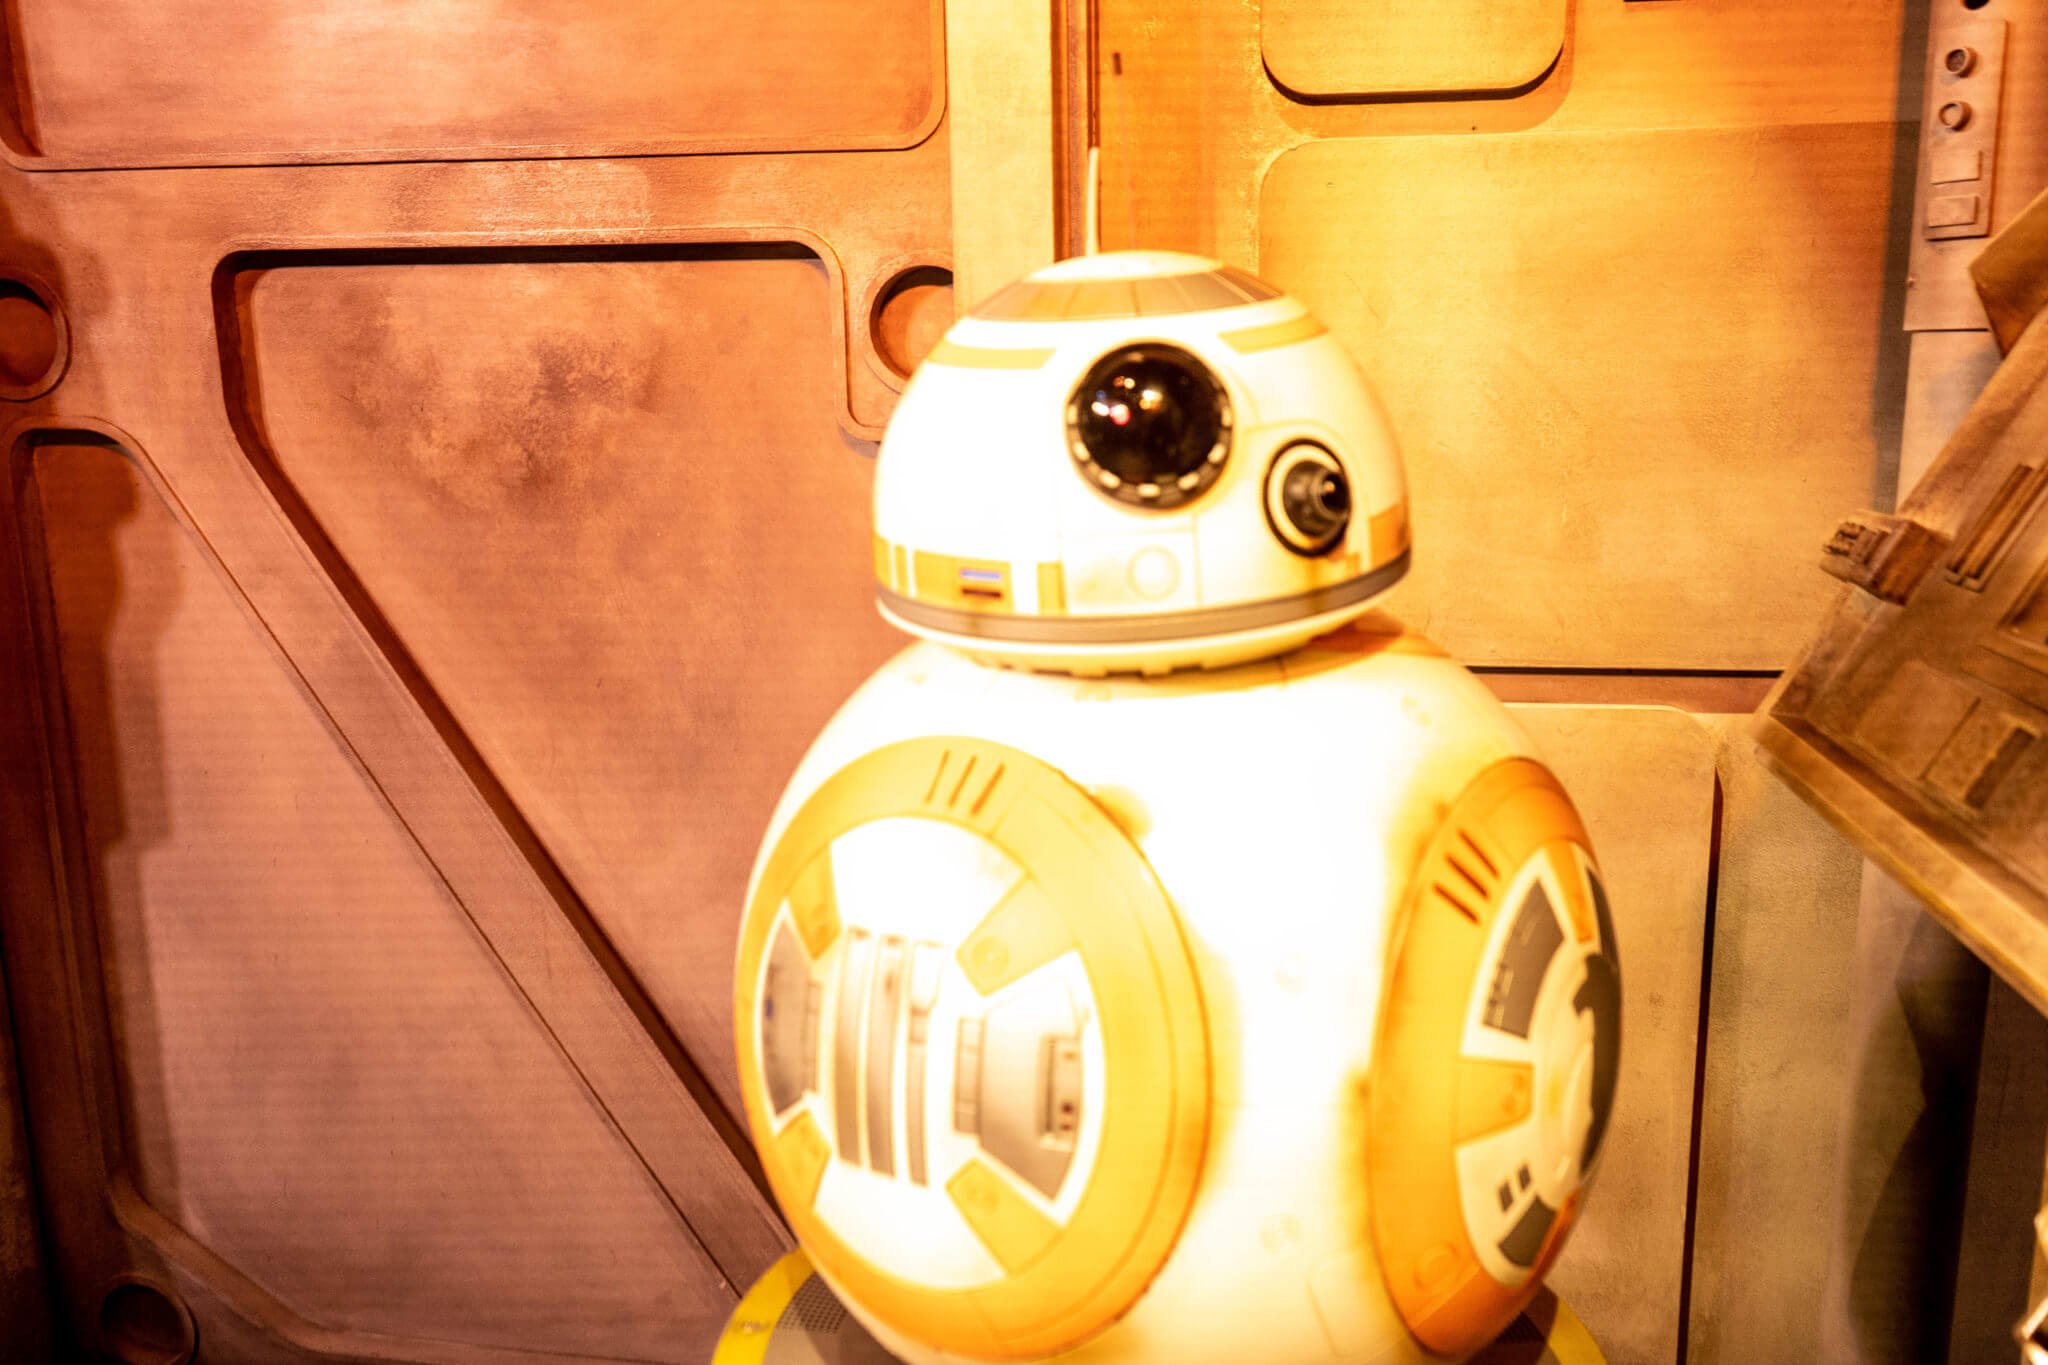 BB-8 meet and greet from star wars: galaxy's edge in hollywood studios